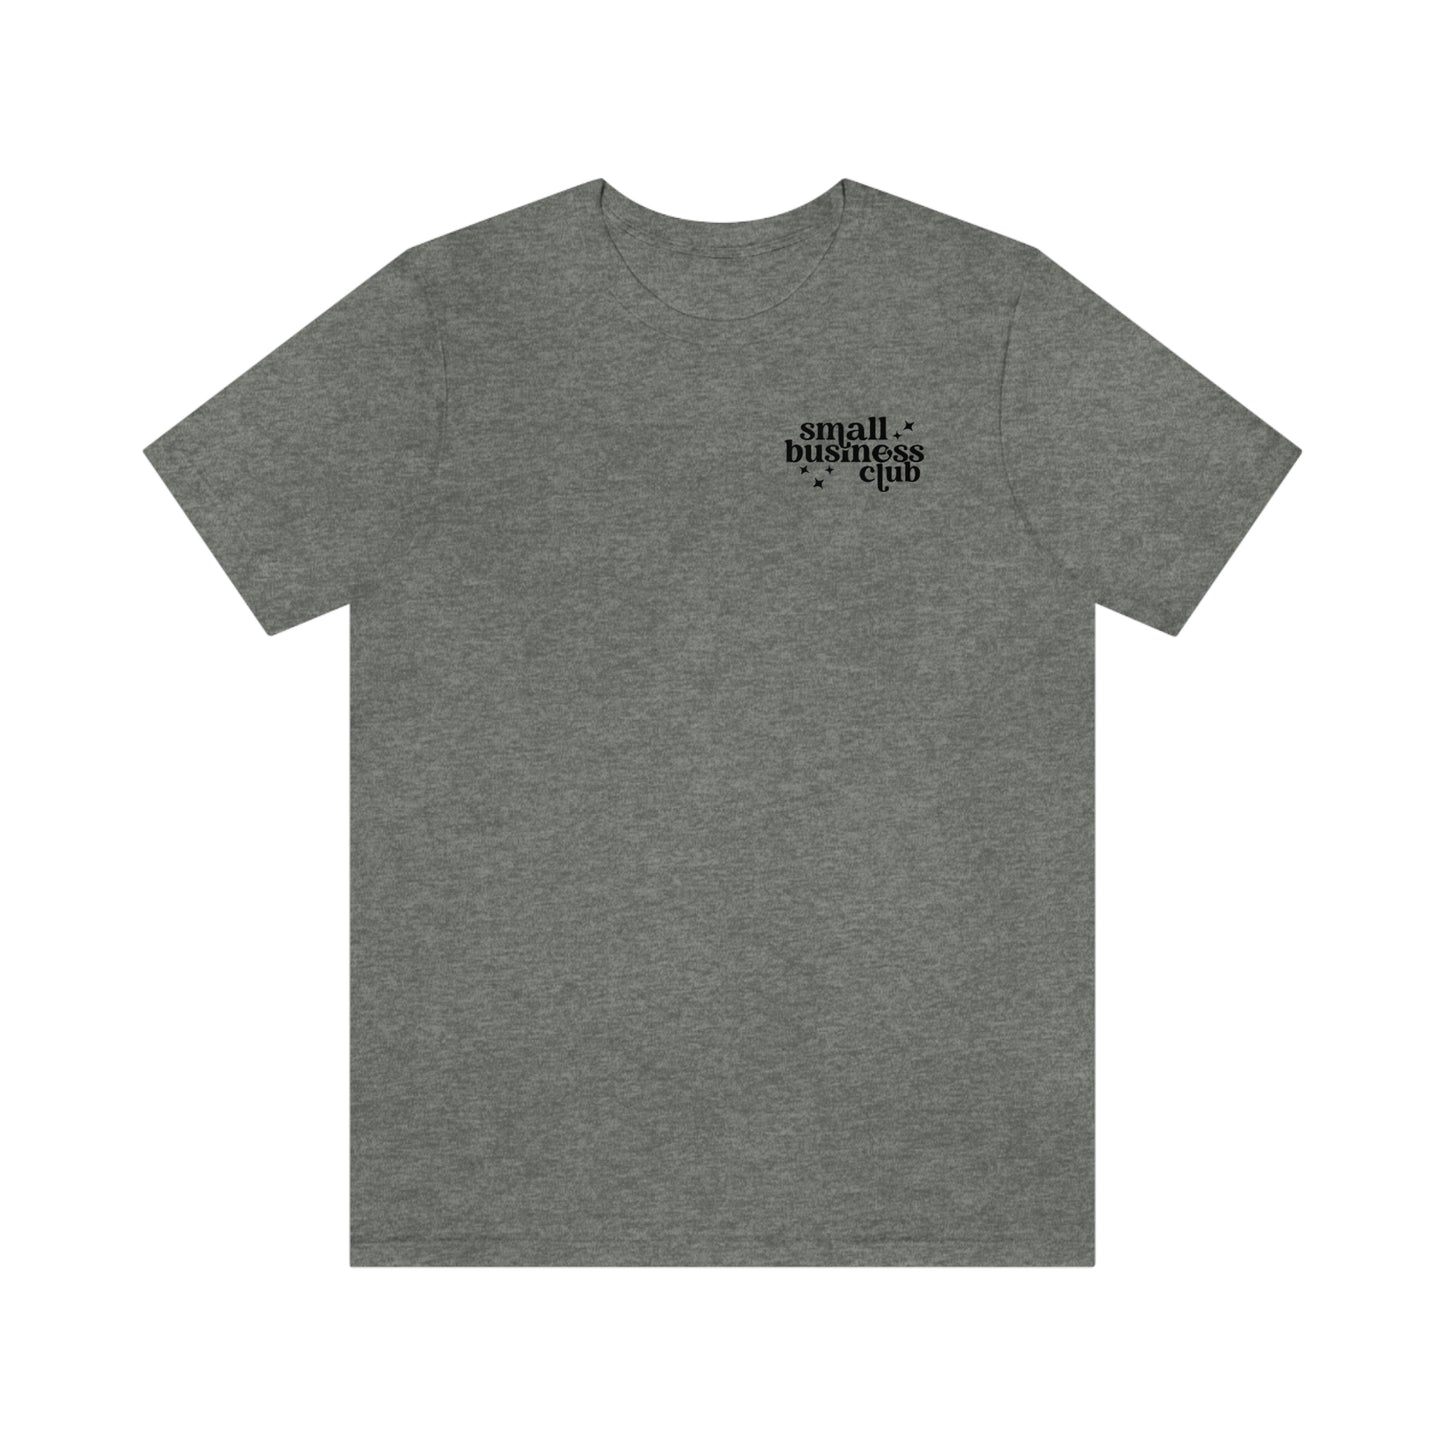 Small Business Club - Maker Tee